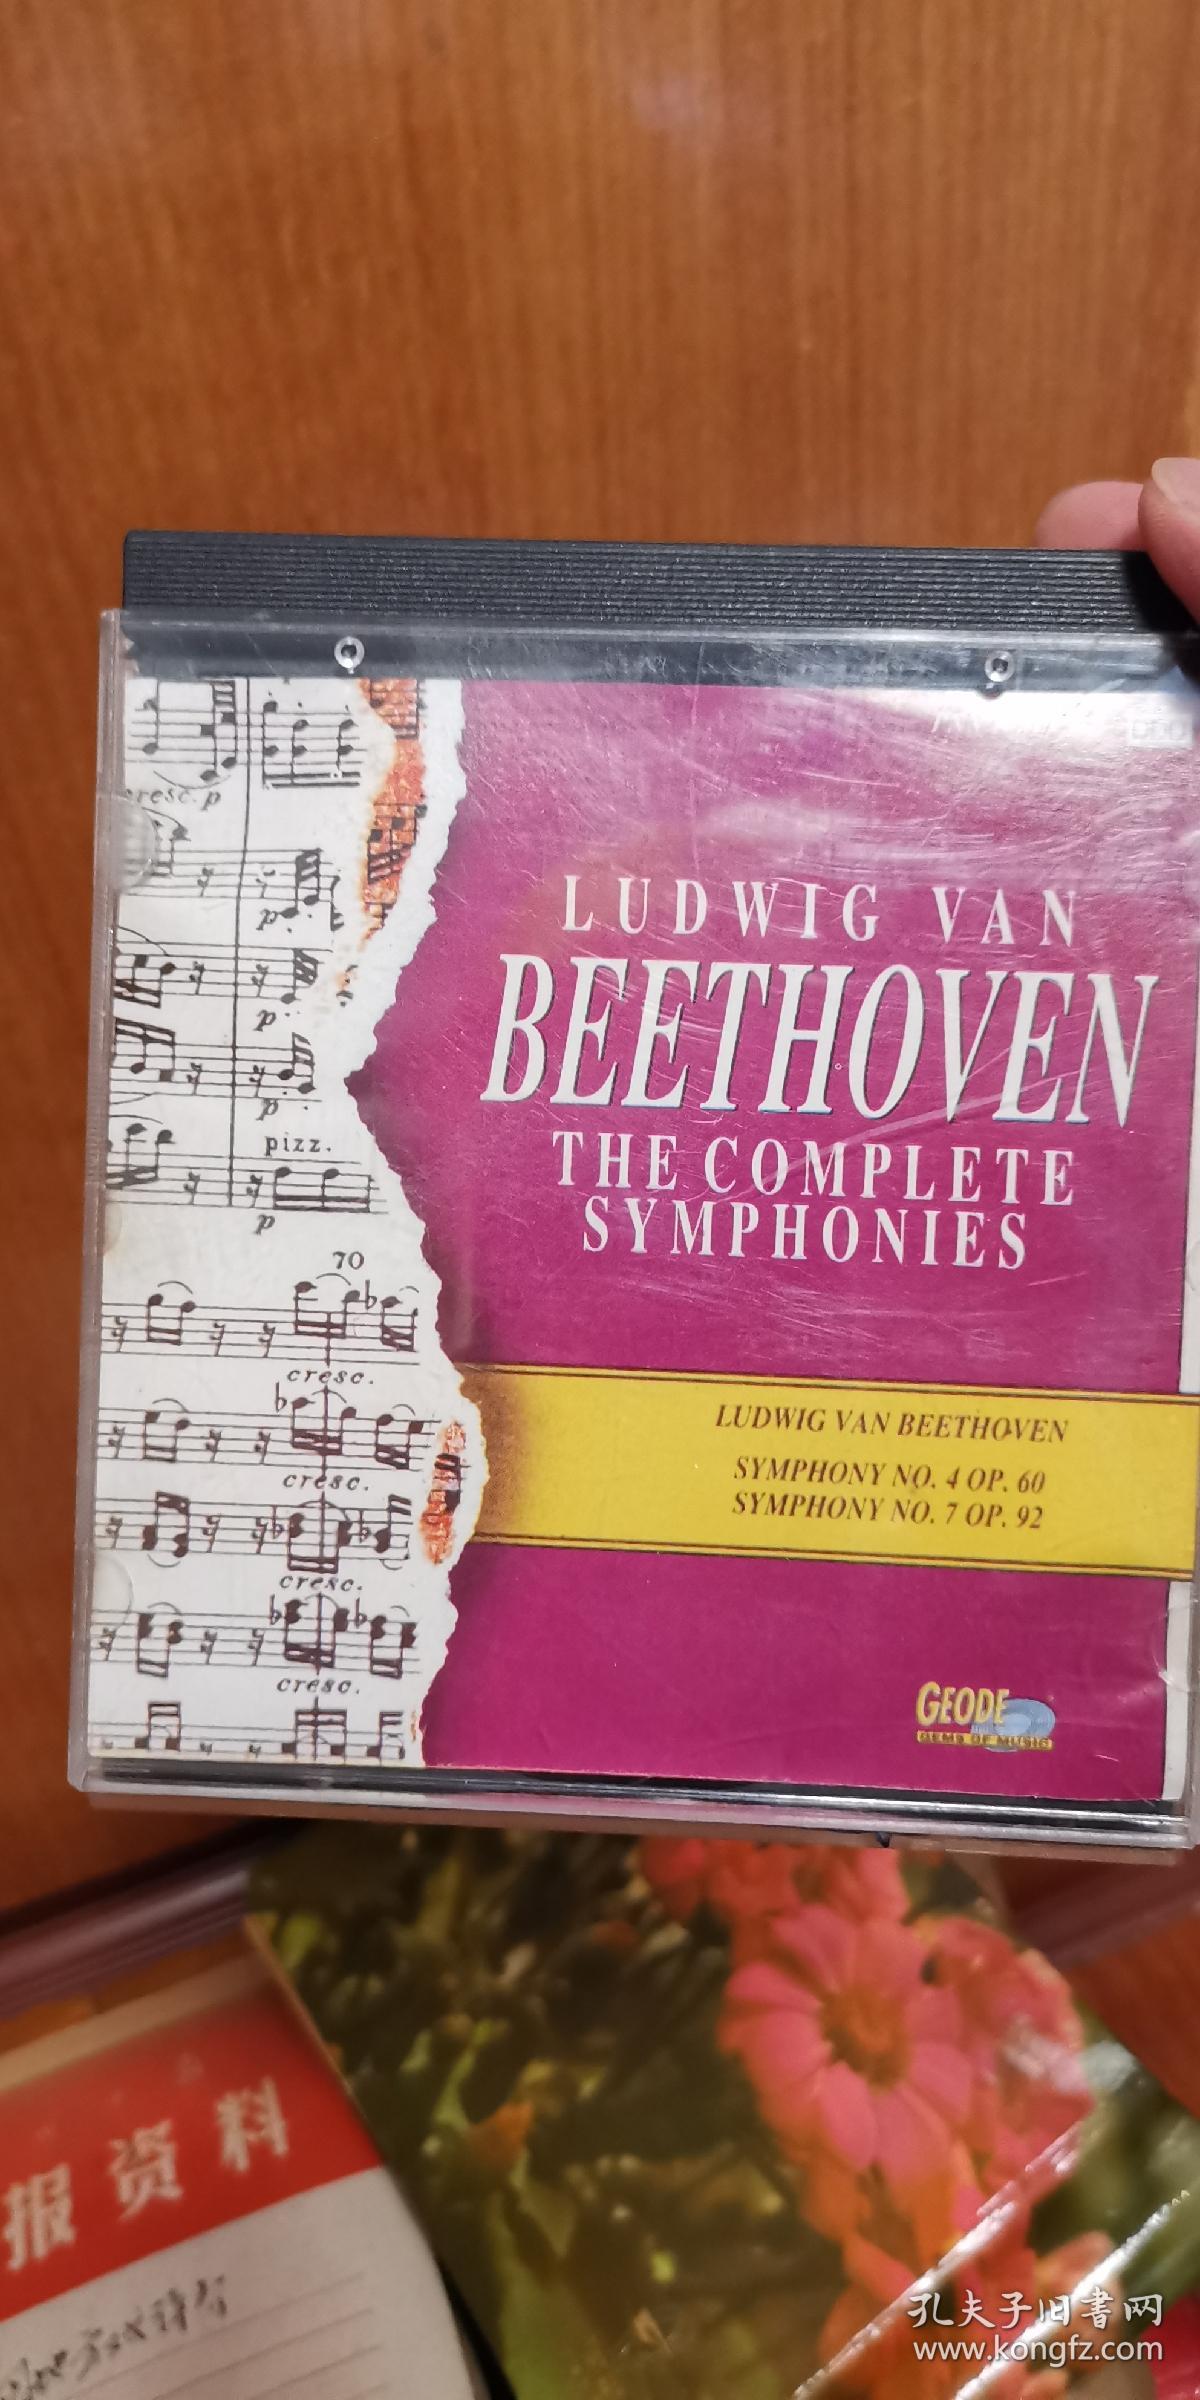 LUDWIG BAN BEETHOVEN THE COMPLETE SYMPHONIES  DVD